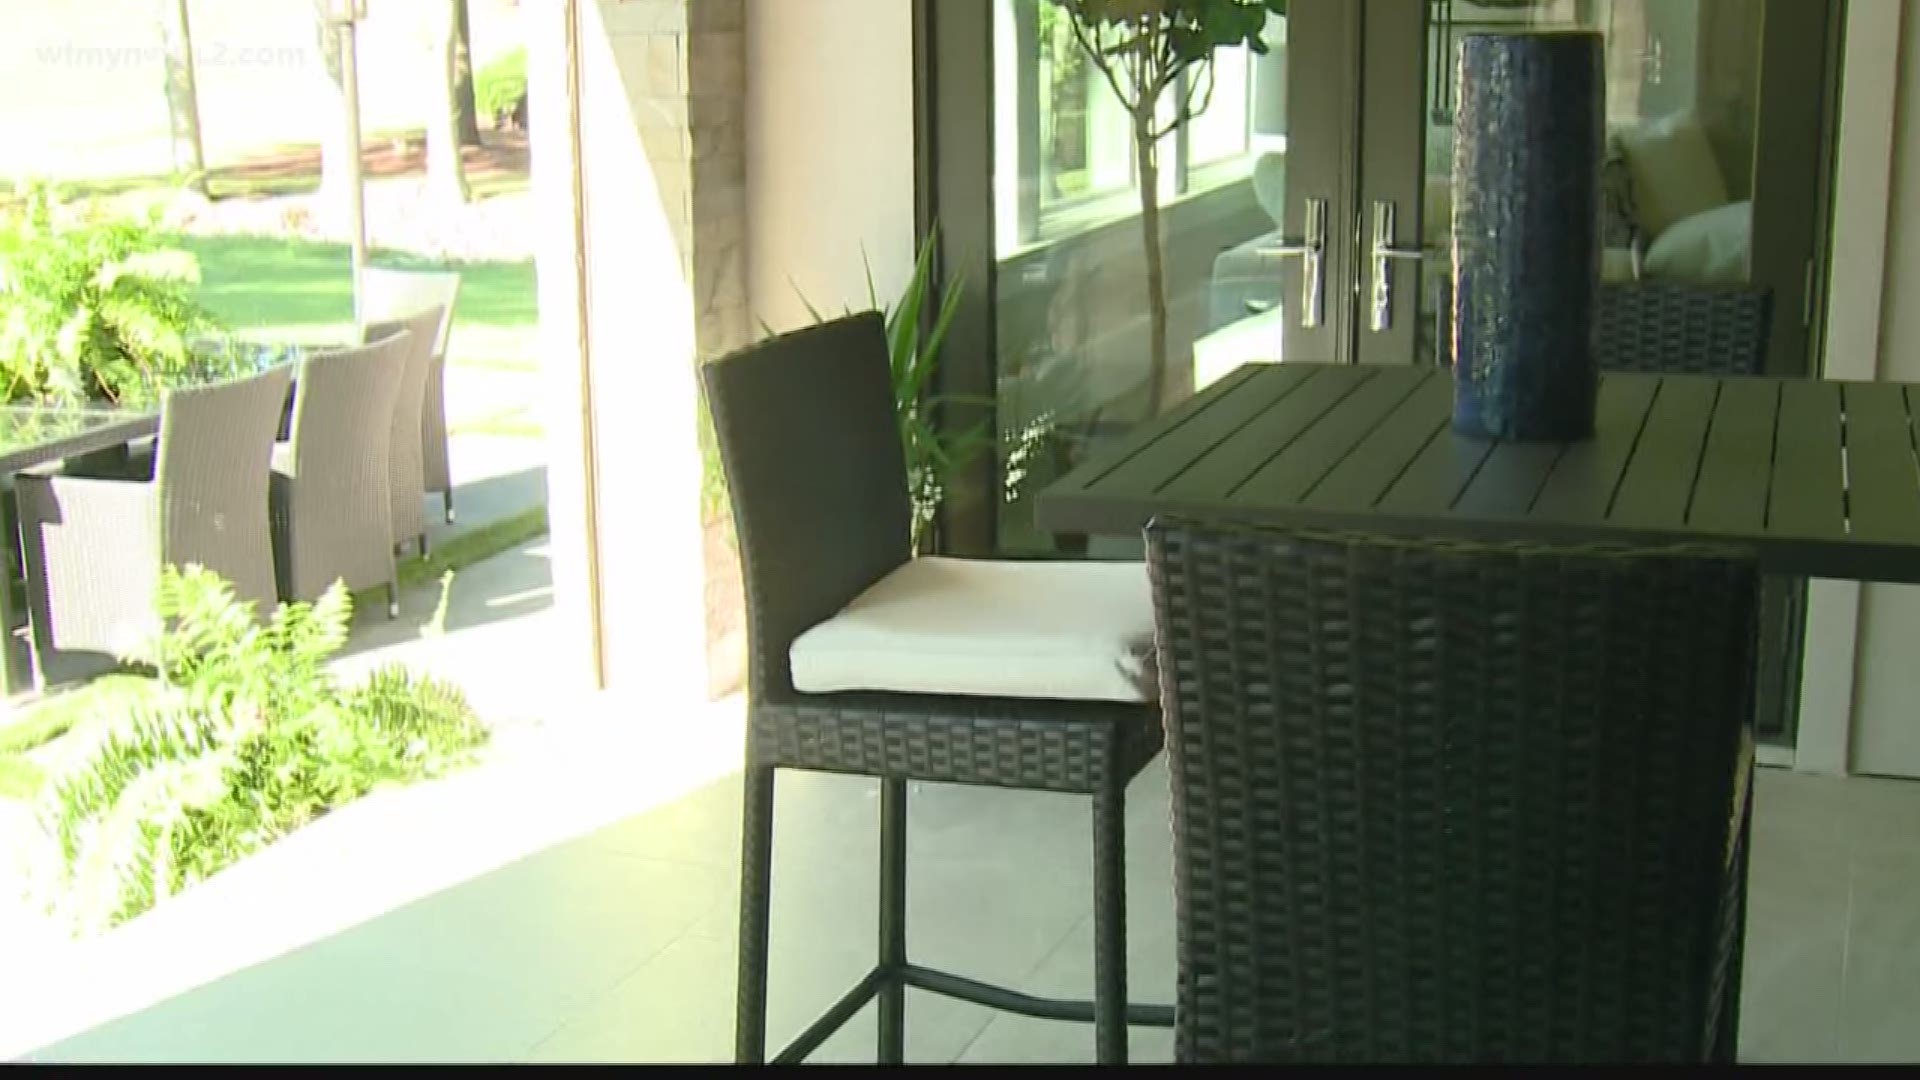 Touring The Outside Space In The "Wolfe: Make-A-Wish" House